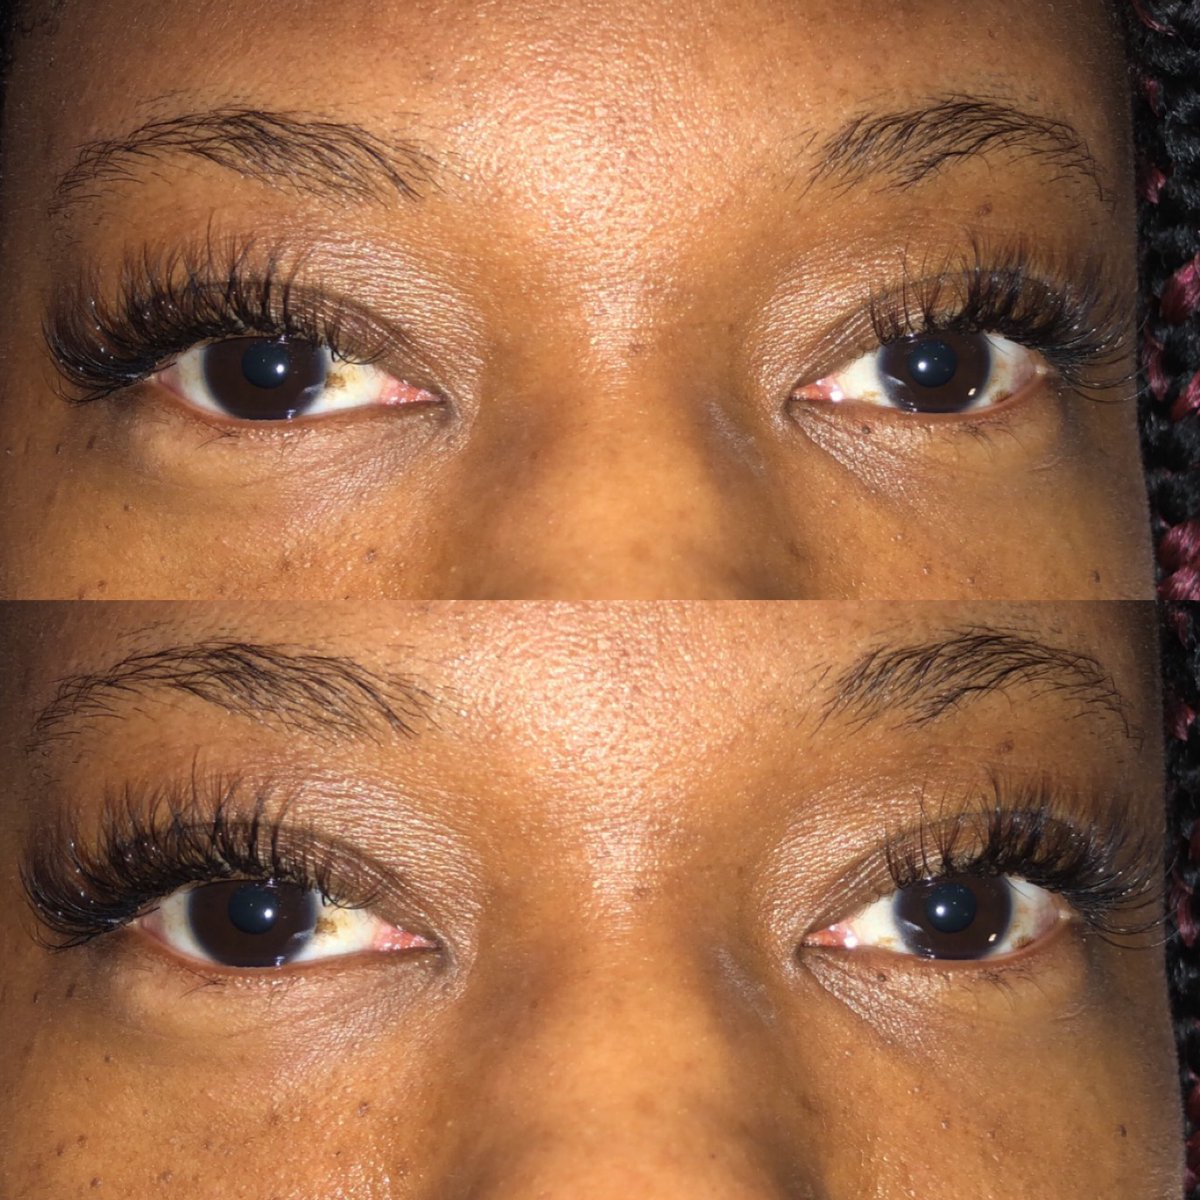 Let’s see those lashes with no filters 😍😍 Hybrids for my Hot Momma, She LOVED them and so do I ~_~ Promo Slots are still available lash bae’s ✨✨
•
•
•
#757lashes #757lashtech #757lashextensions #757bride #757minklashes #757veganlashes #757mobilelashes #norfolkminklashes